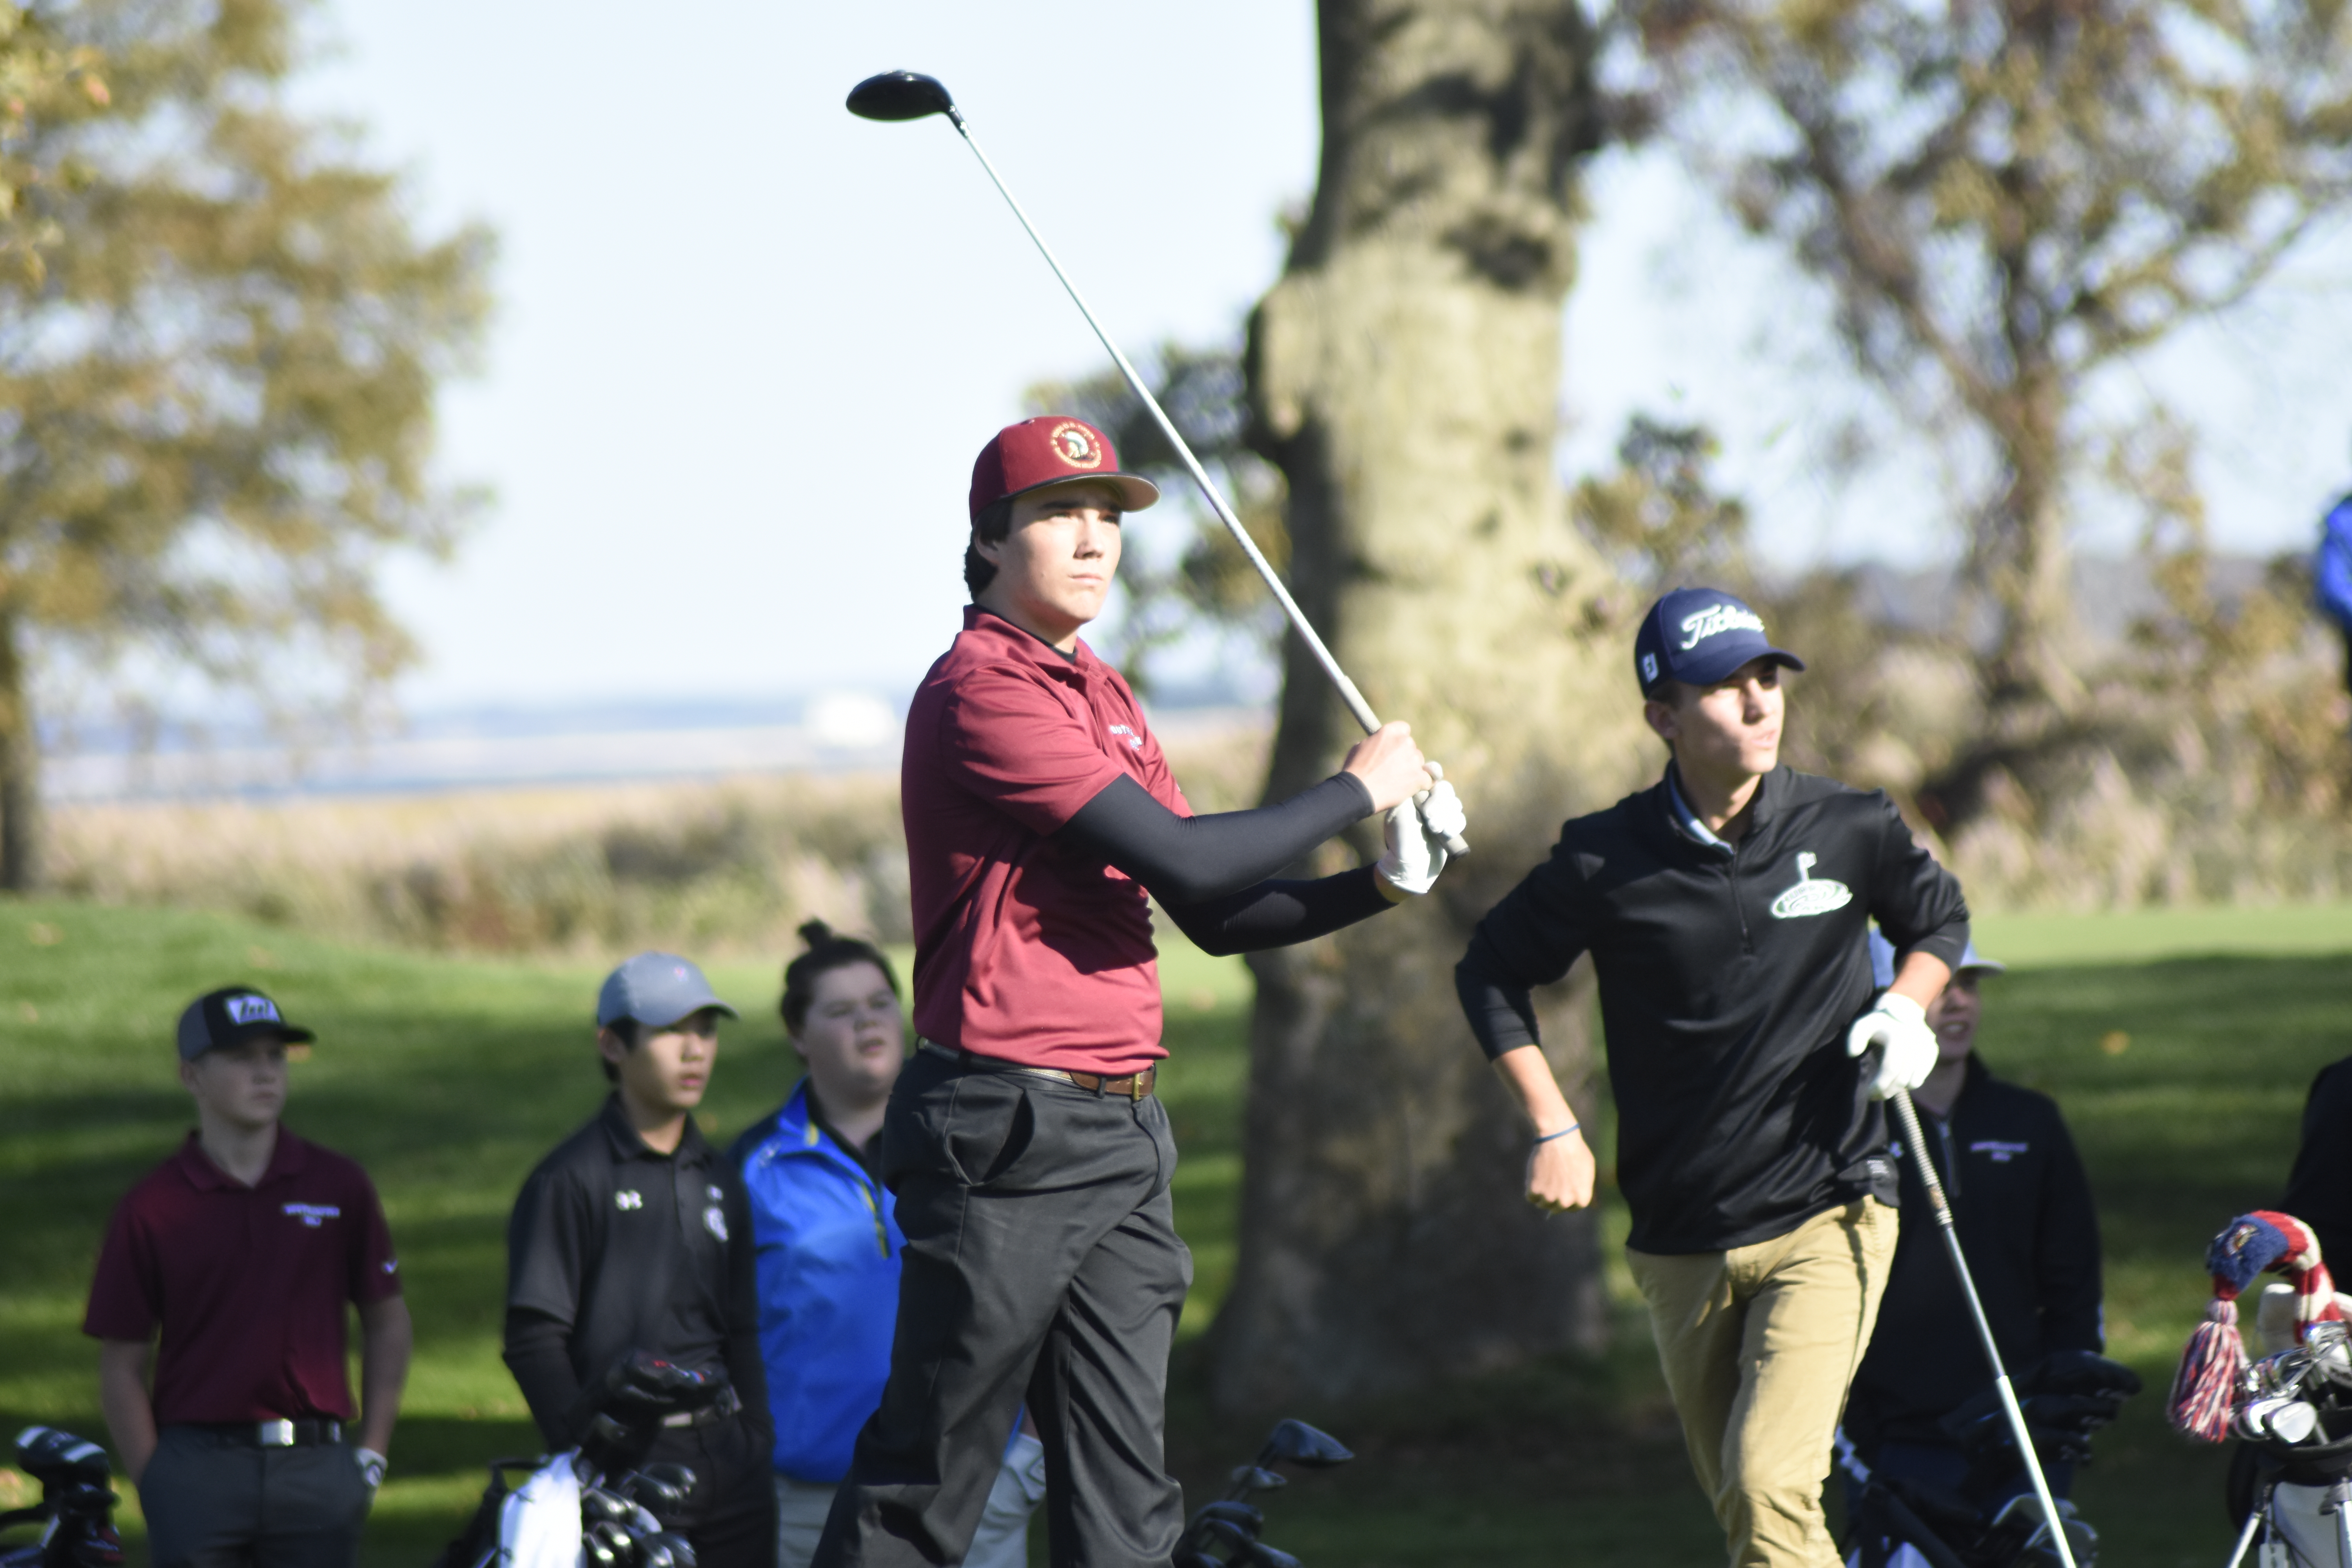 Southampton's Chris Kreymborg tees off at the 10th hole at Indian Island Golf Club in Riverhead at the start of the quarterfinal match between the Mariners and Hurricanes on Thursday, Ocotber 24.